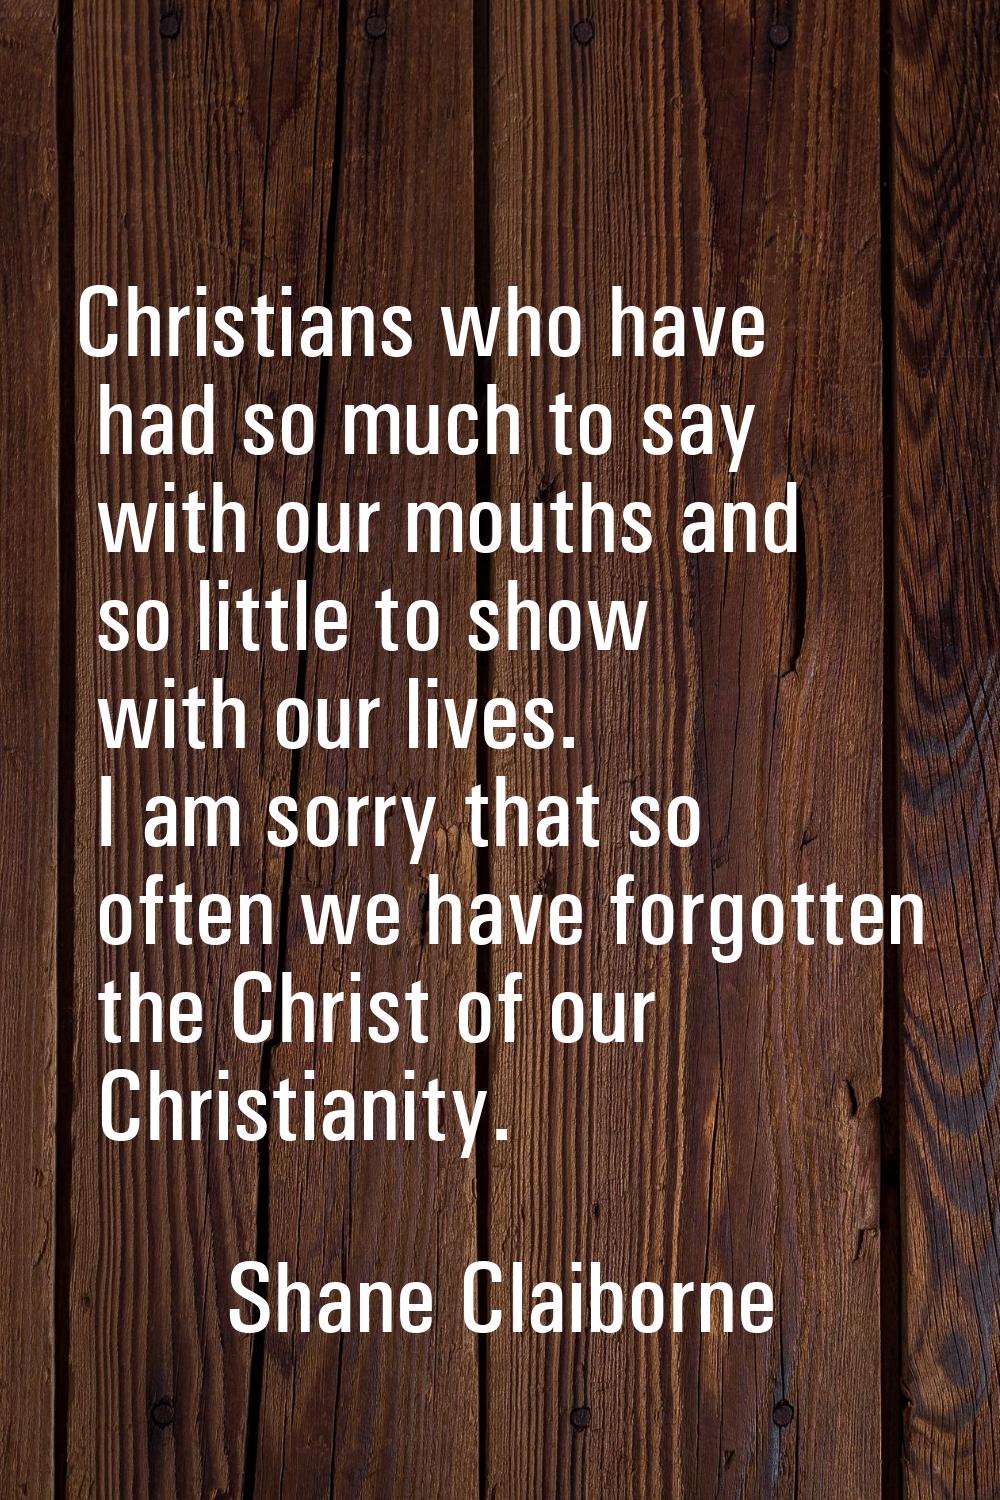 Christians who have had so much to say with our mouths and so little to show with our lives. I am s